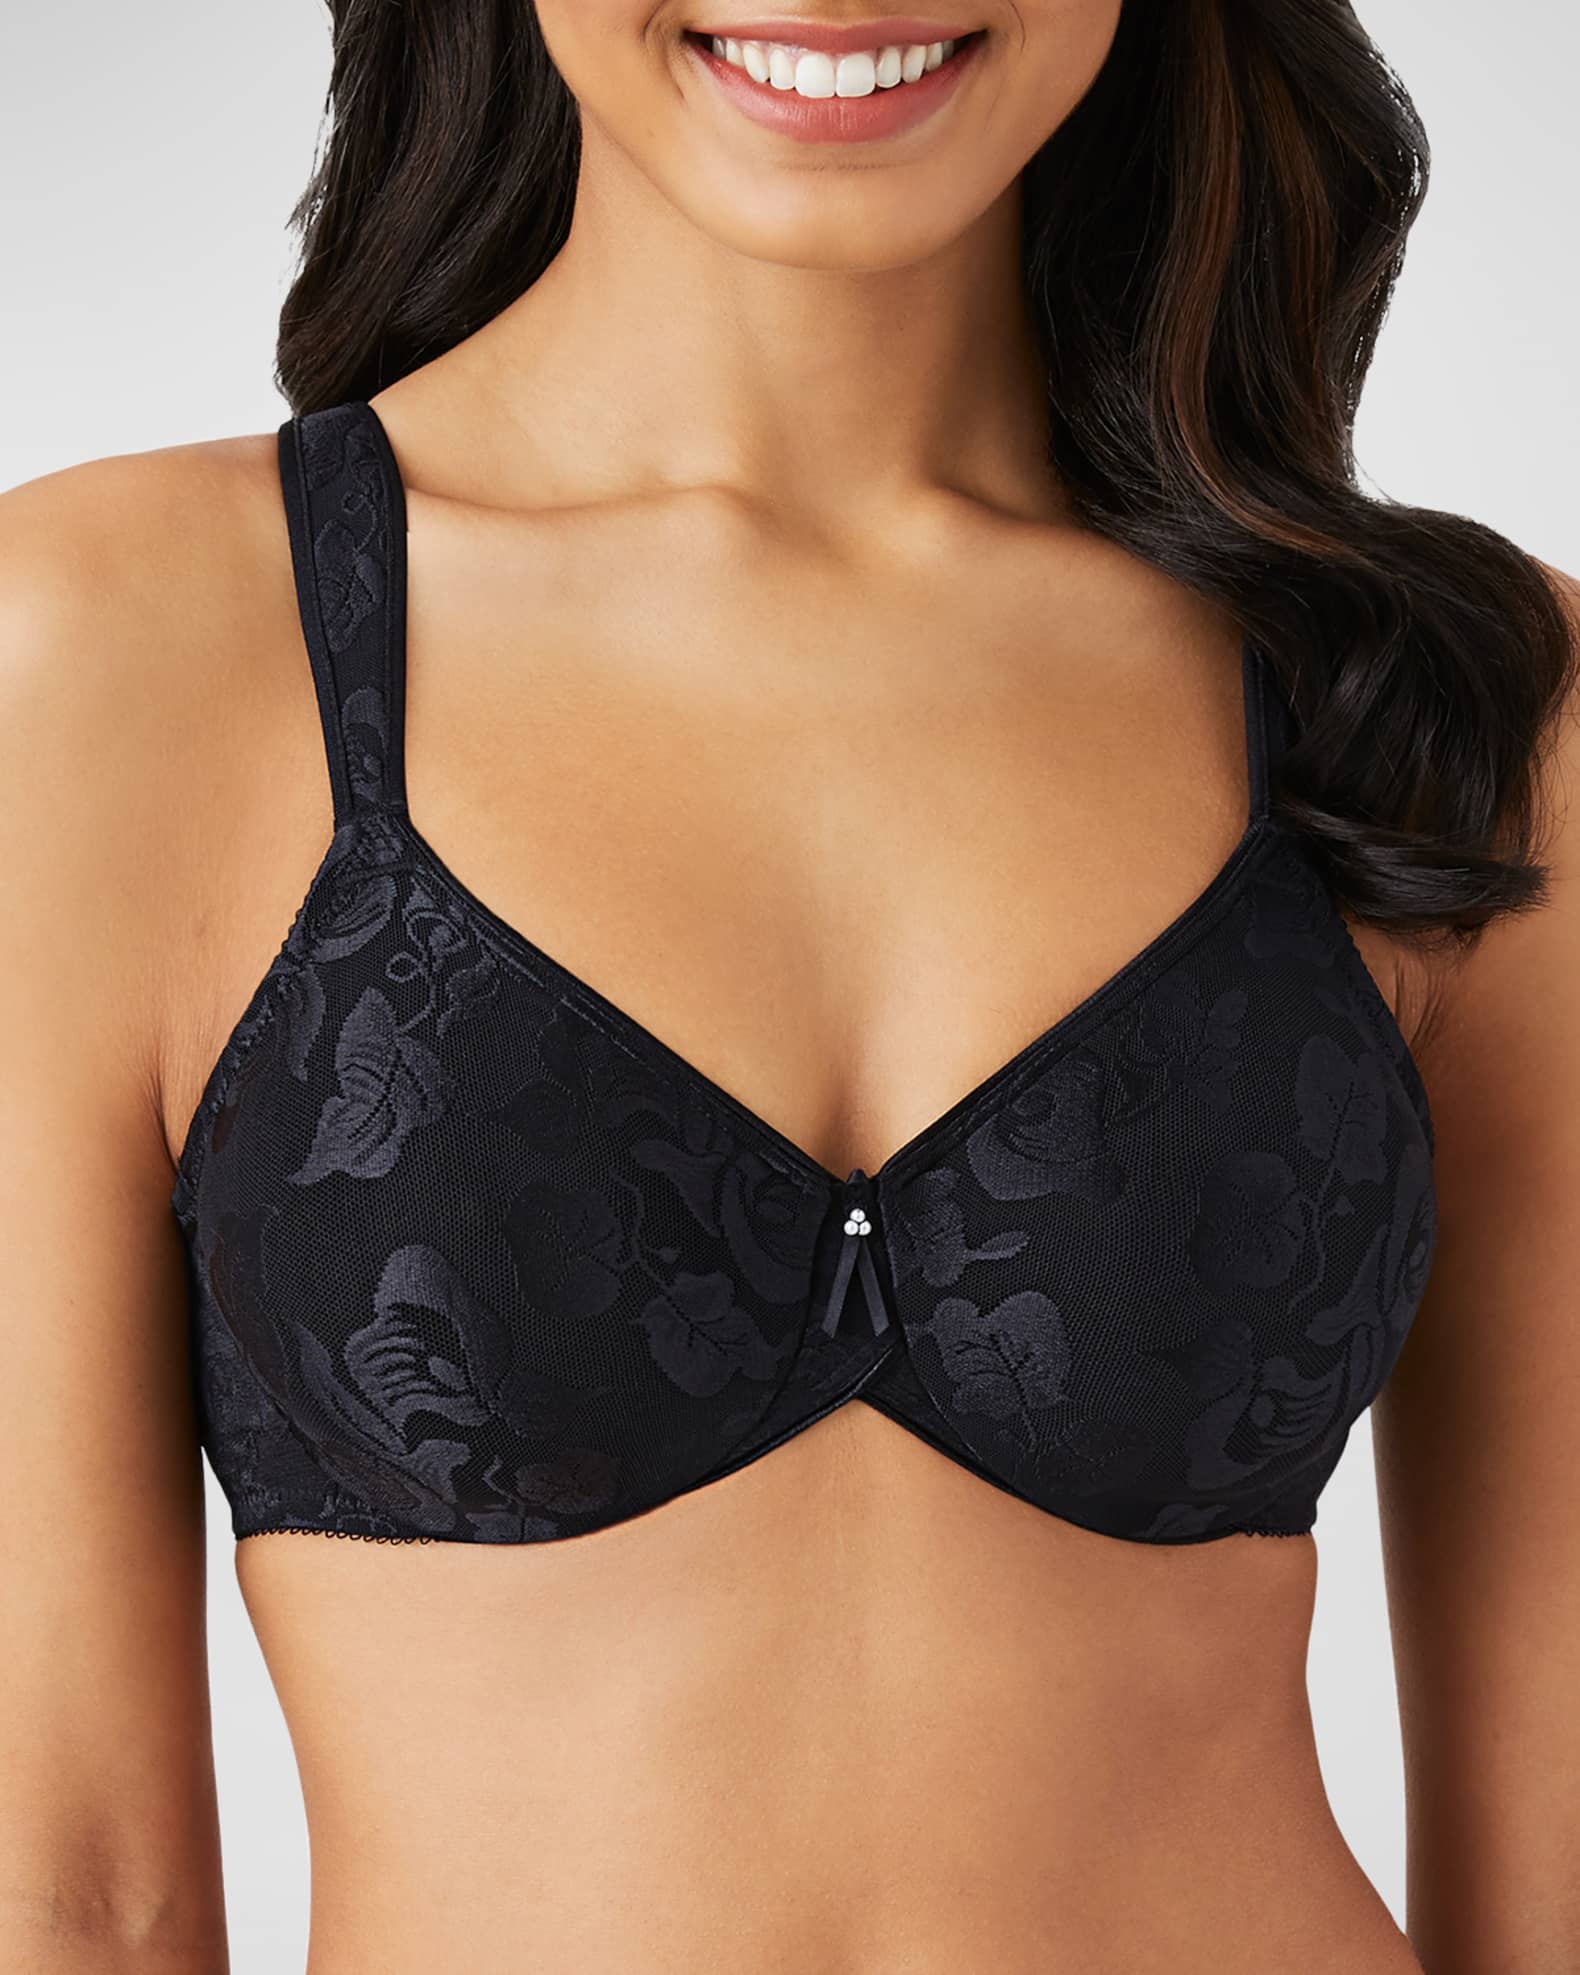 Black Lycra underwired bra with Chantilly lace